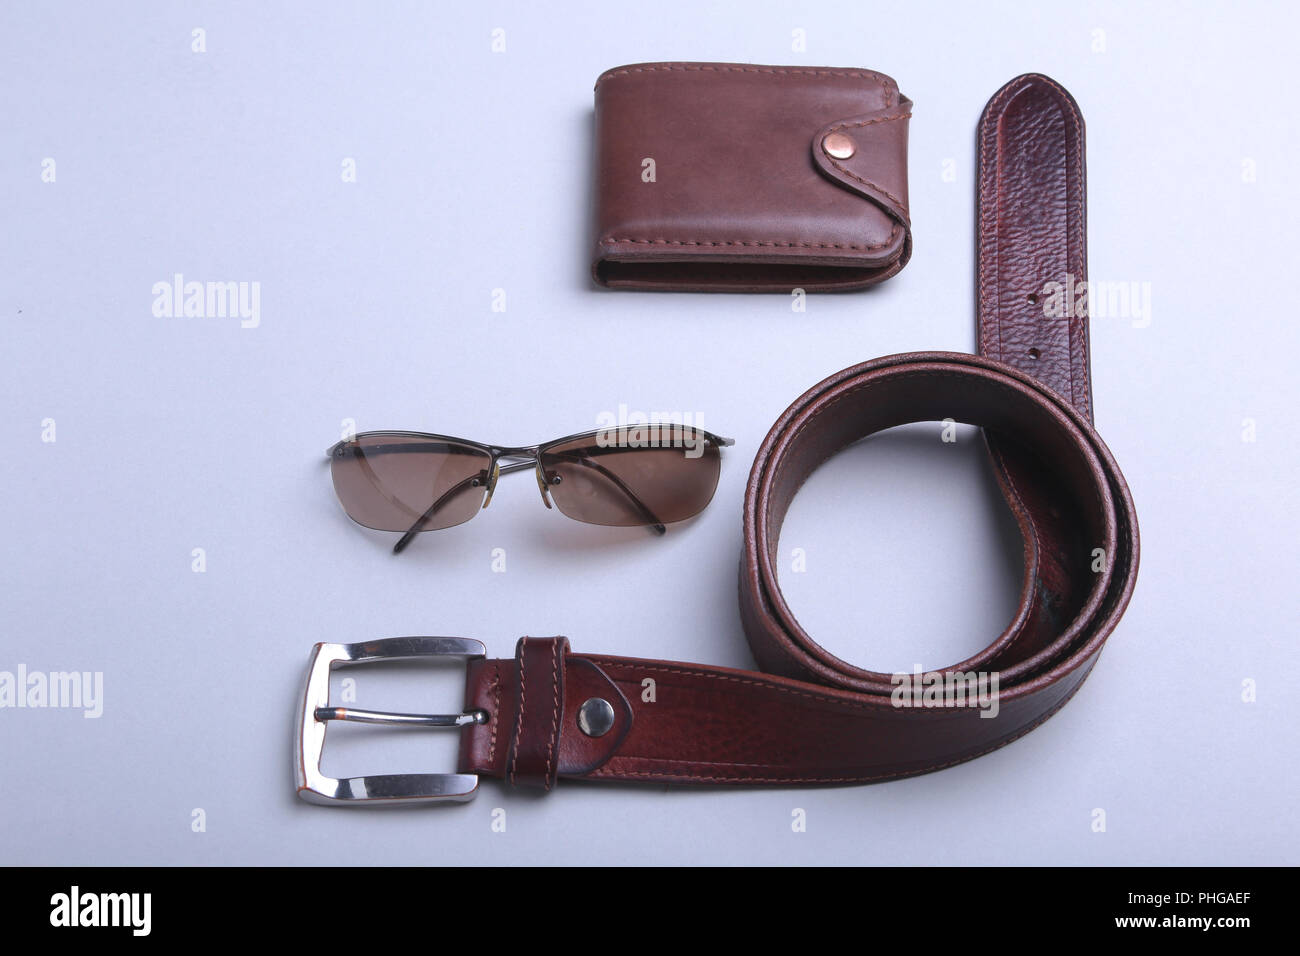 Men's accessories for business and rekreation. A professional studio photograph of men's business accessories. Top view composition. Stock Photo